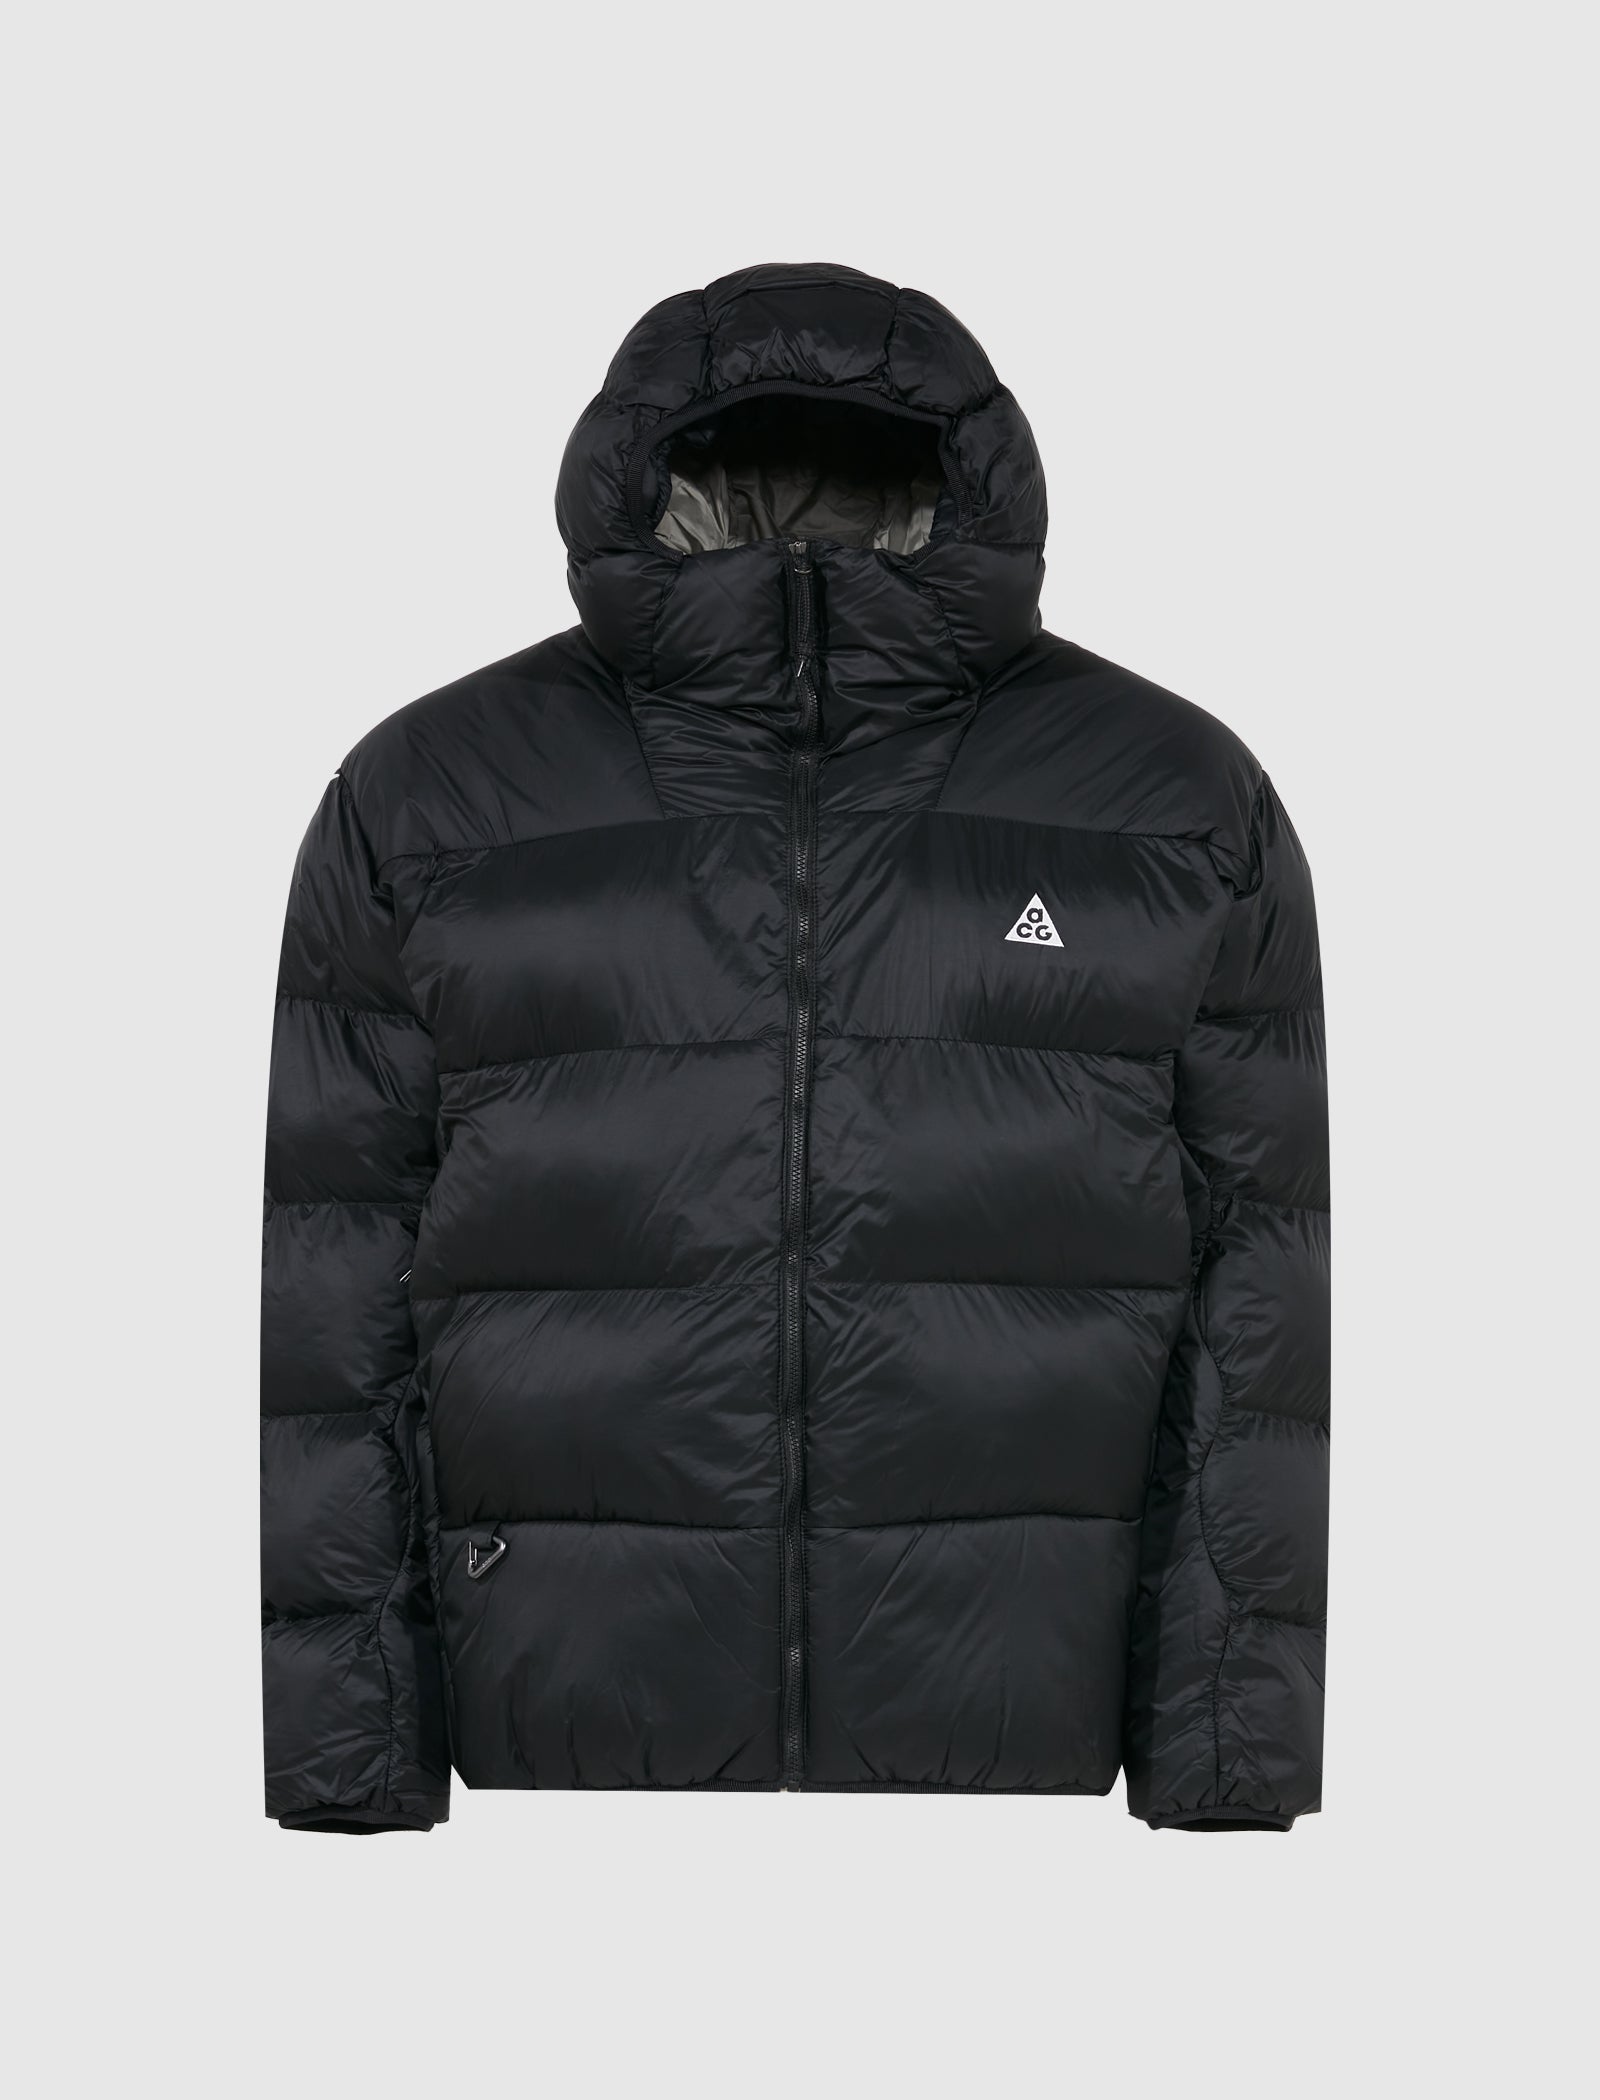 THERMA-FIT ADV ACG JACKET